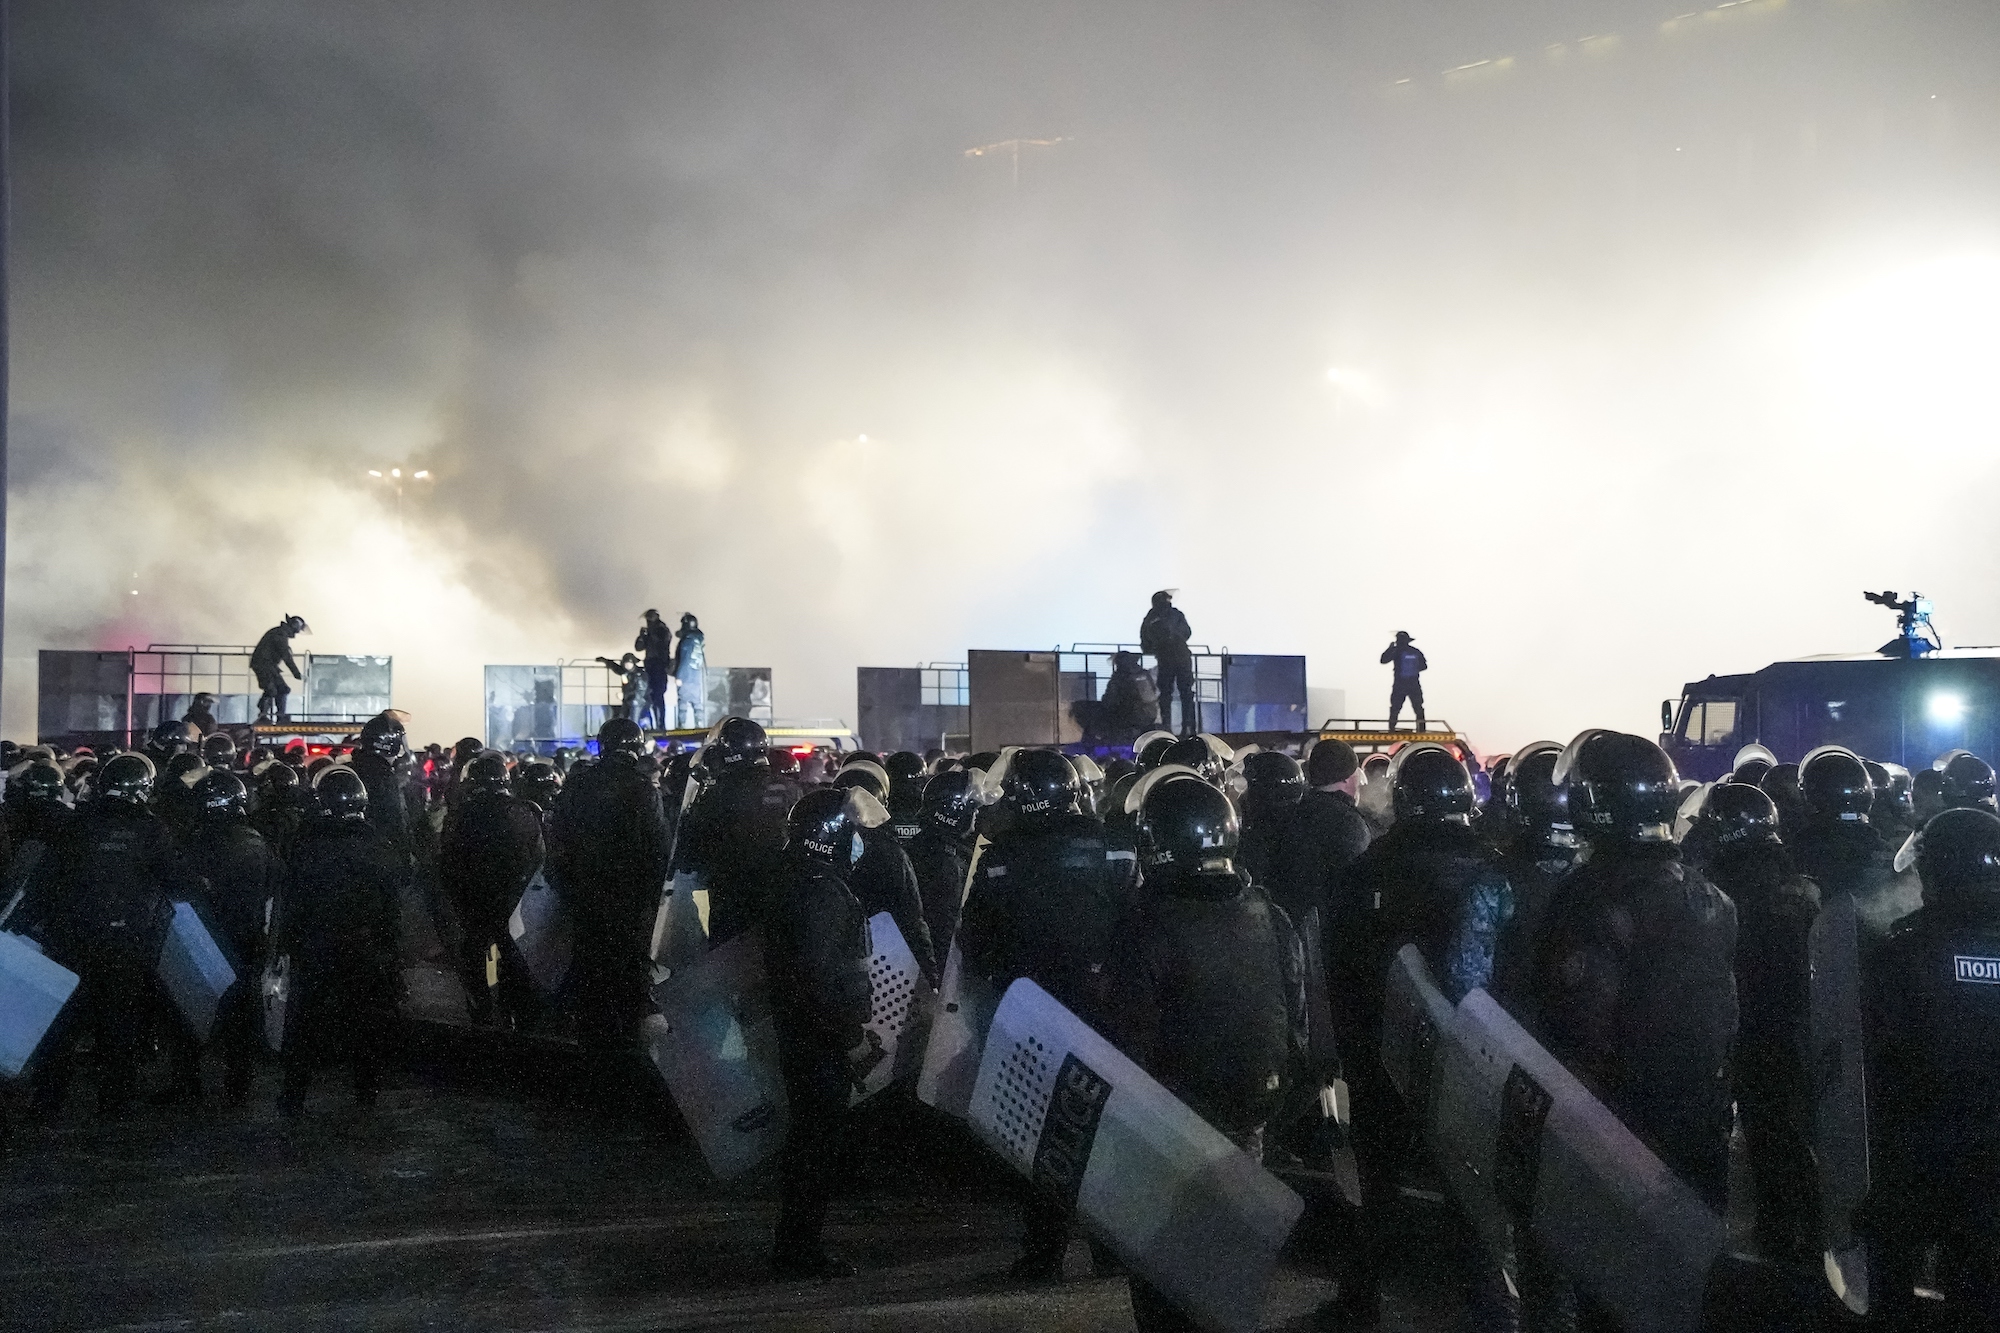 Protesters and riot police stand on a street in Almaty, Kazakhstan, as smoke rises in the background